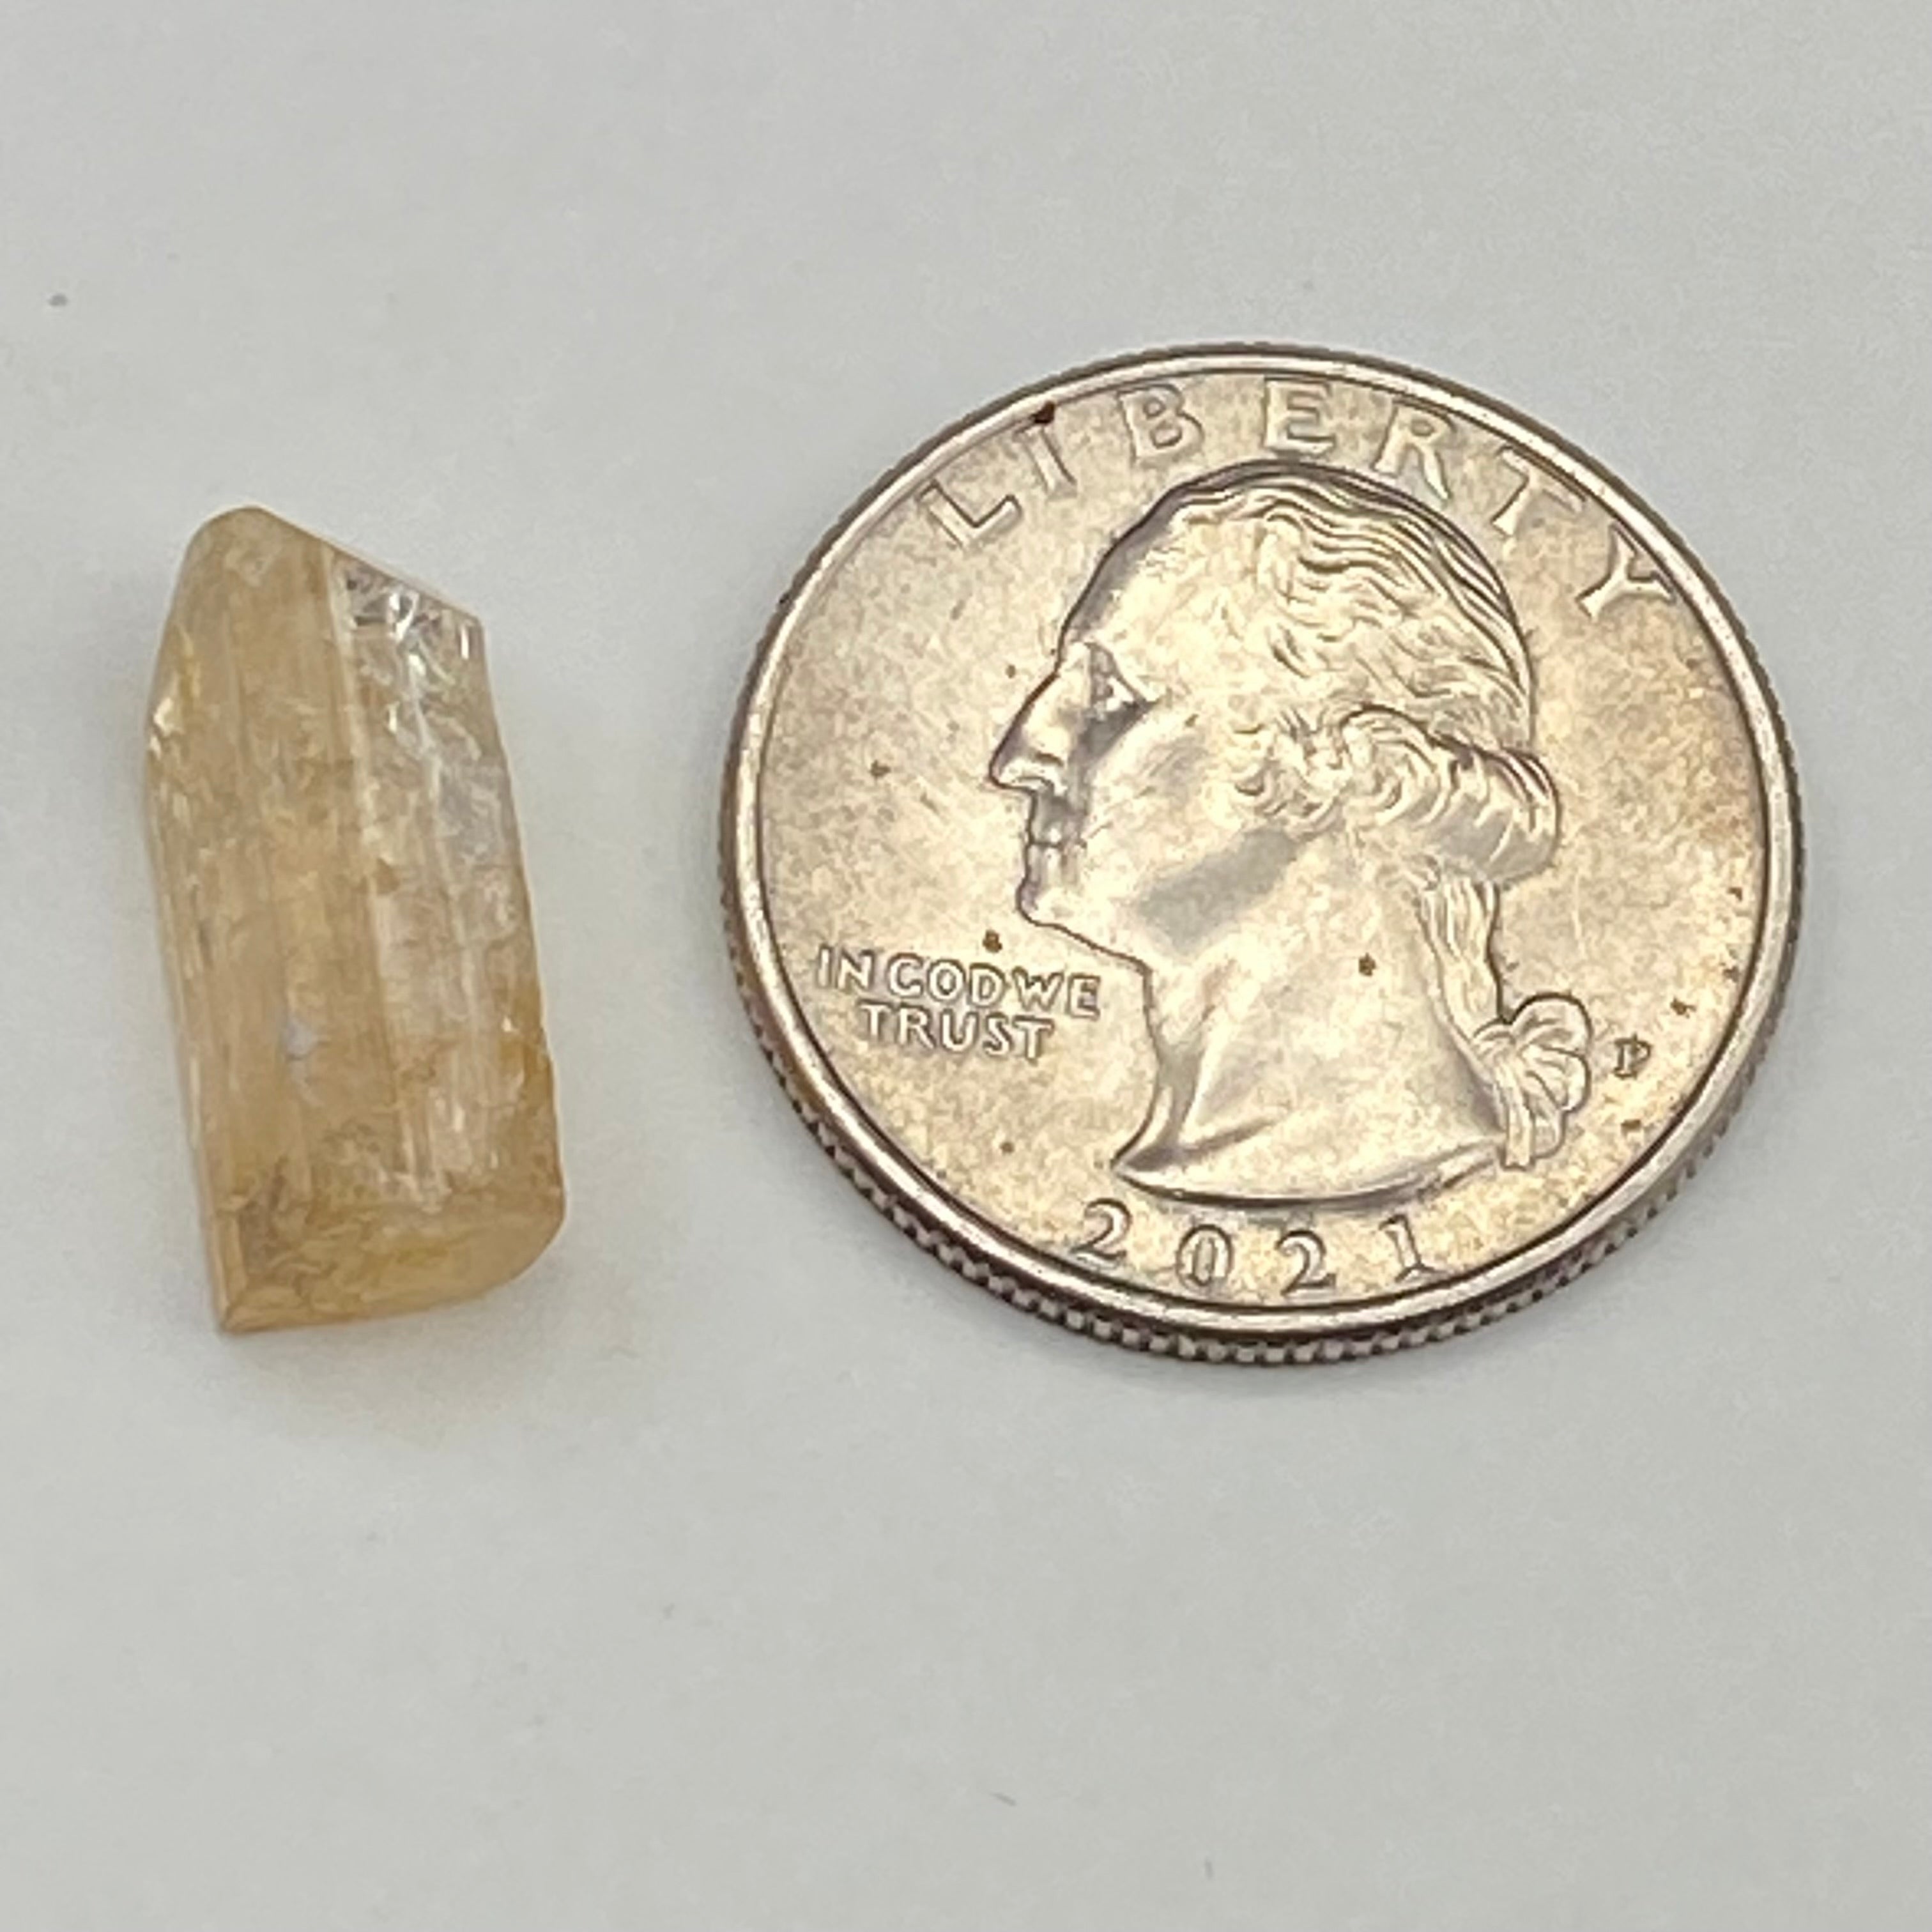 Imperial Topaz Natural Full Terminated Crystal - 167